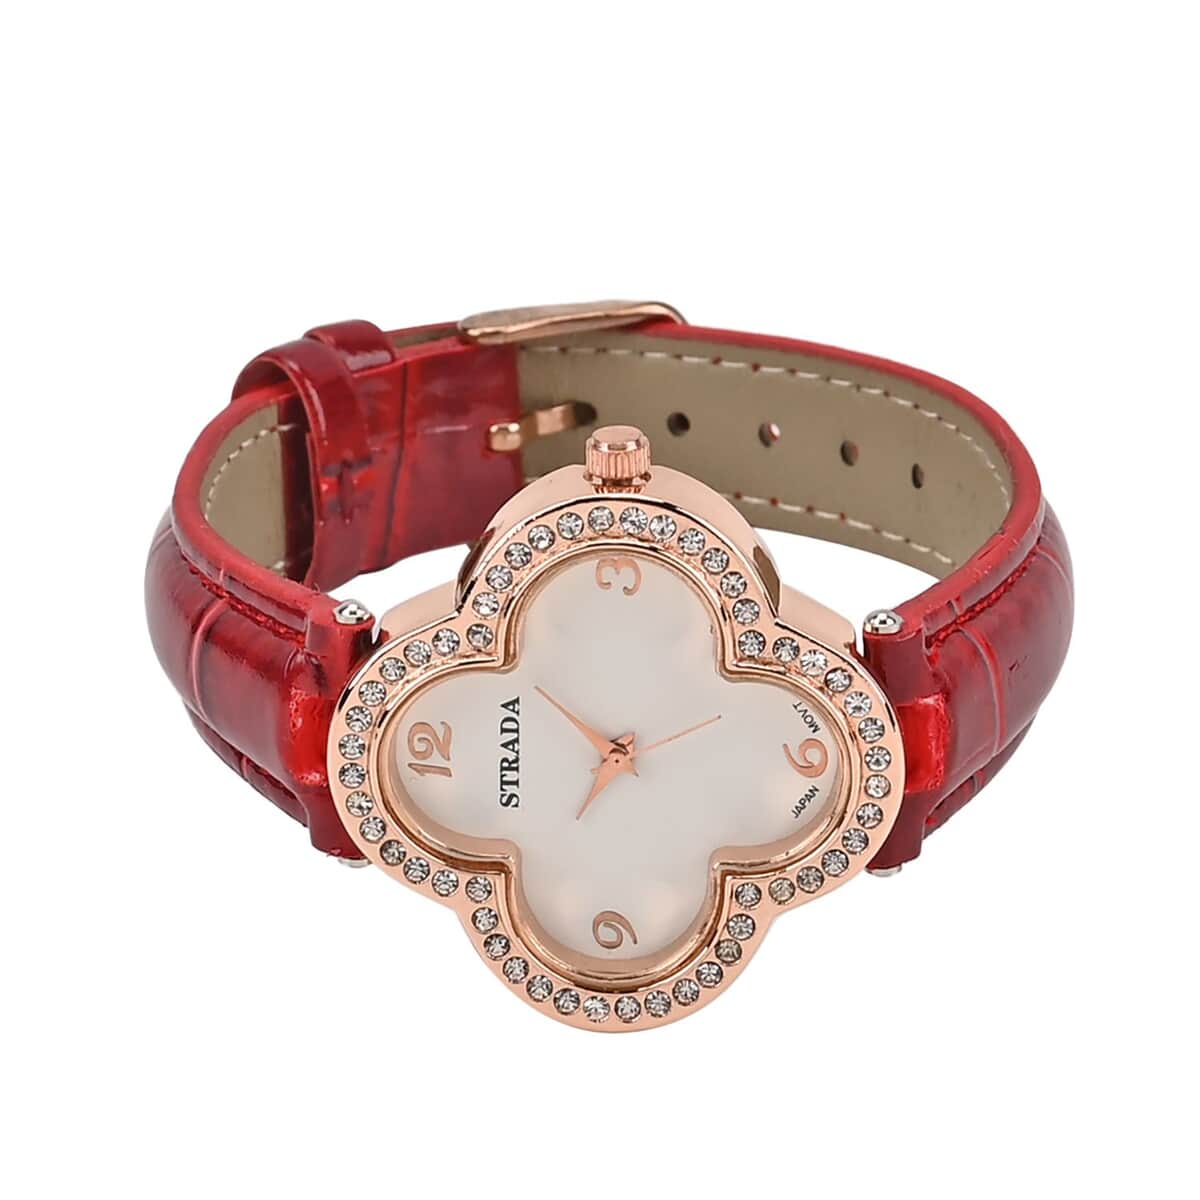 Strada Austrian Crystal Japanese Movement Four Clover Leaf Pattern Watch in Rosetone with Red Faux Leather Strap (36.57mm) (6.5-8.5 Inches) image number 4